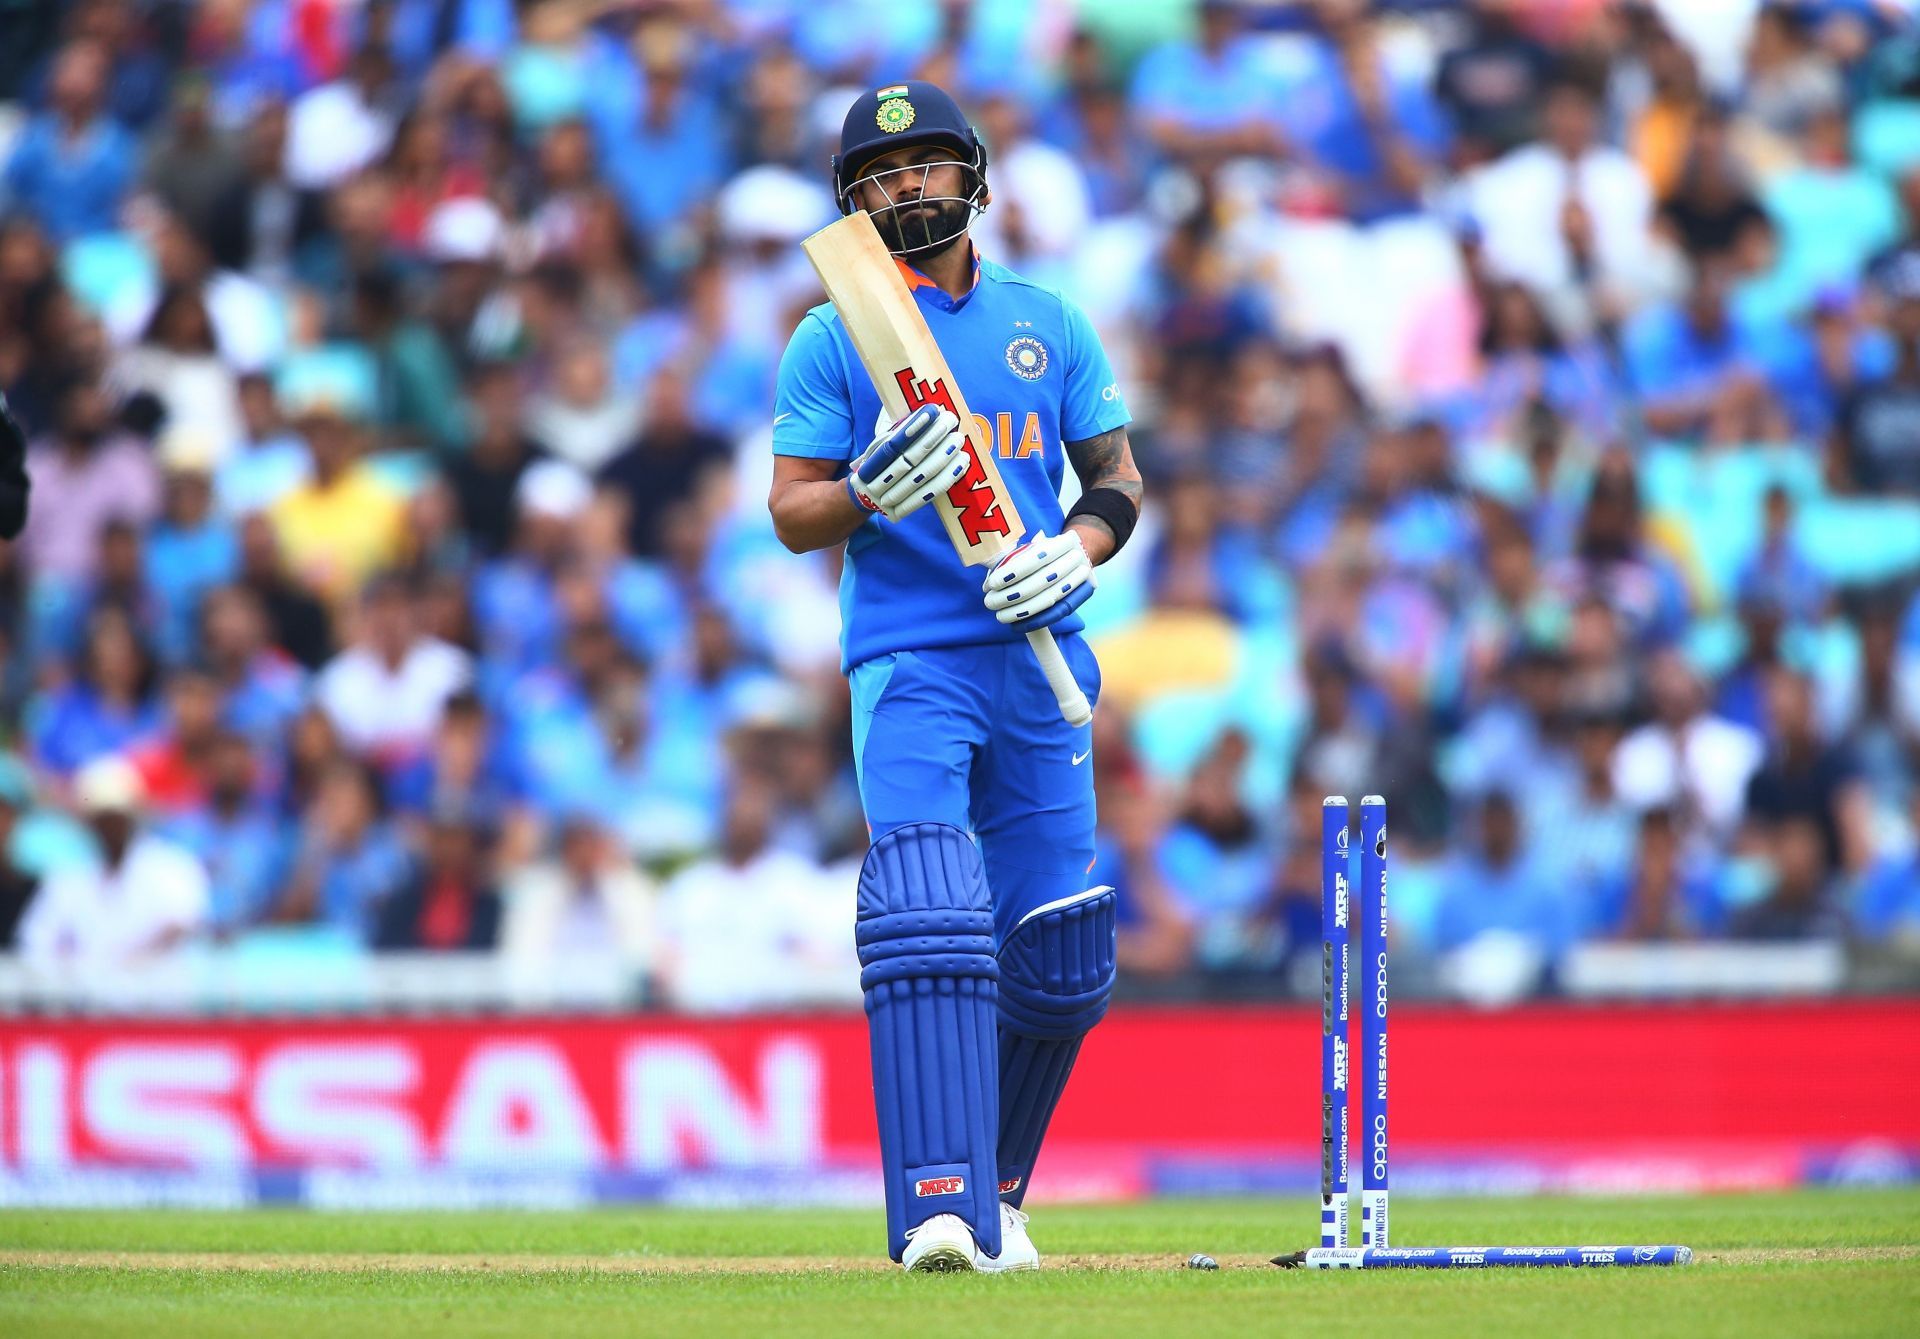 Virat Kohli has looked a shadow of his former run-accumulating self across formats over the last 12 months.